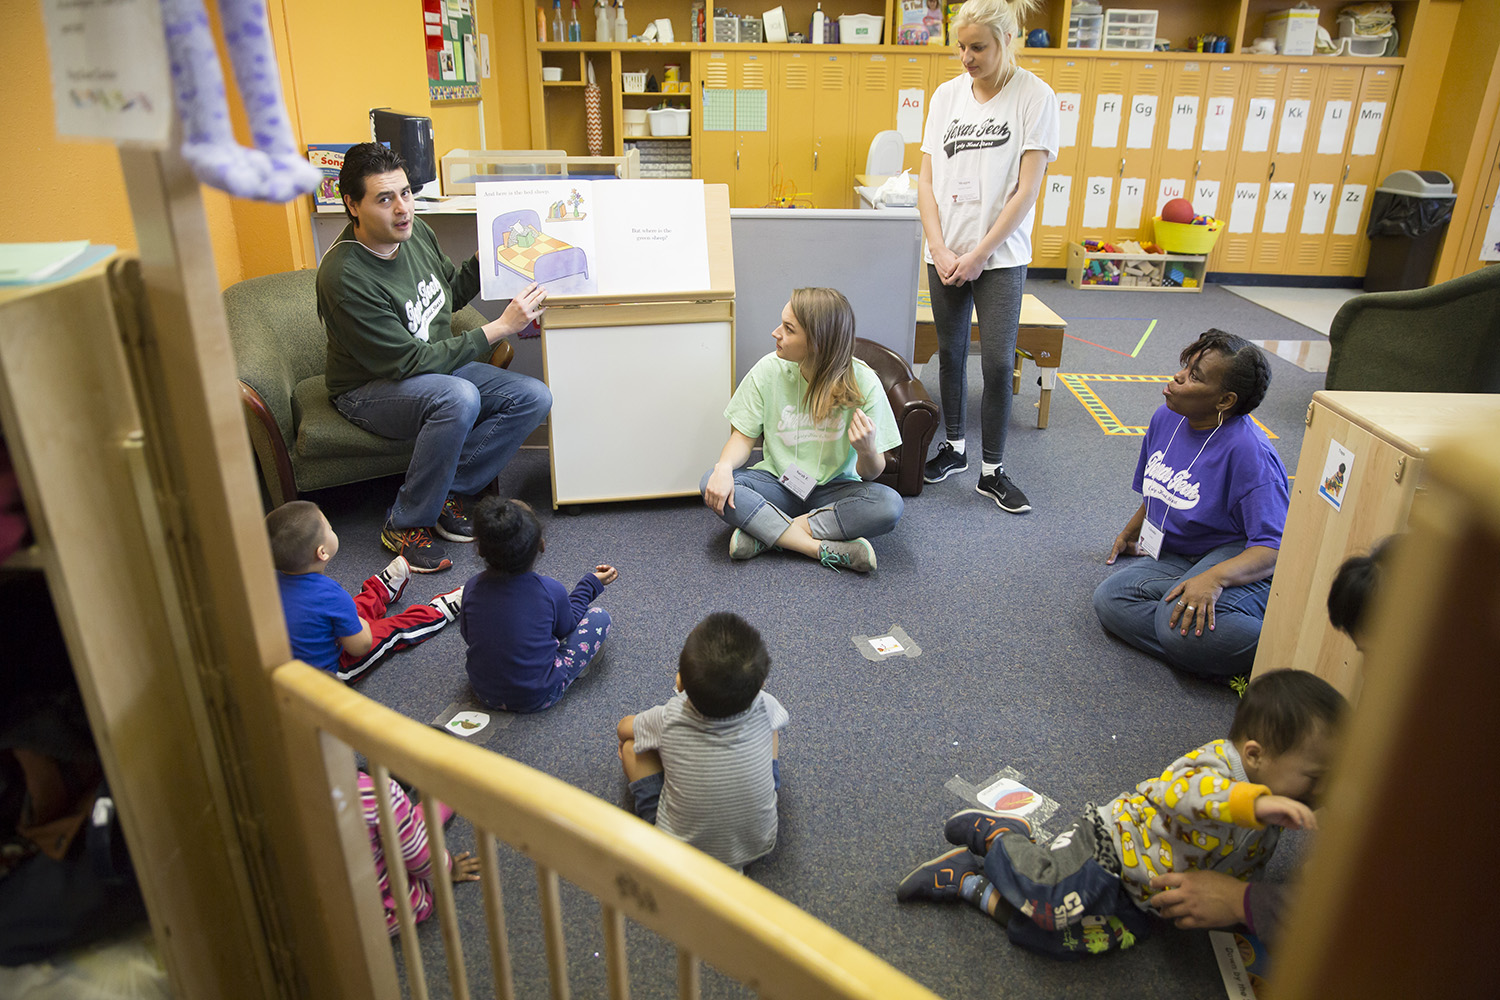 Teachers and children in the Early Head Start program participate in story time. Throughout the spring and summer, story time was conducted virtually to keep the children engaged and learning even while the center